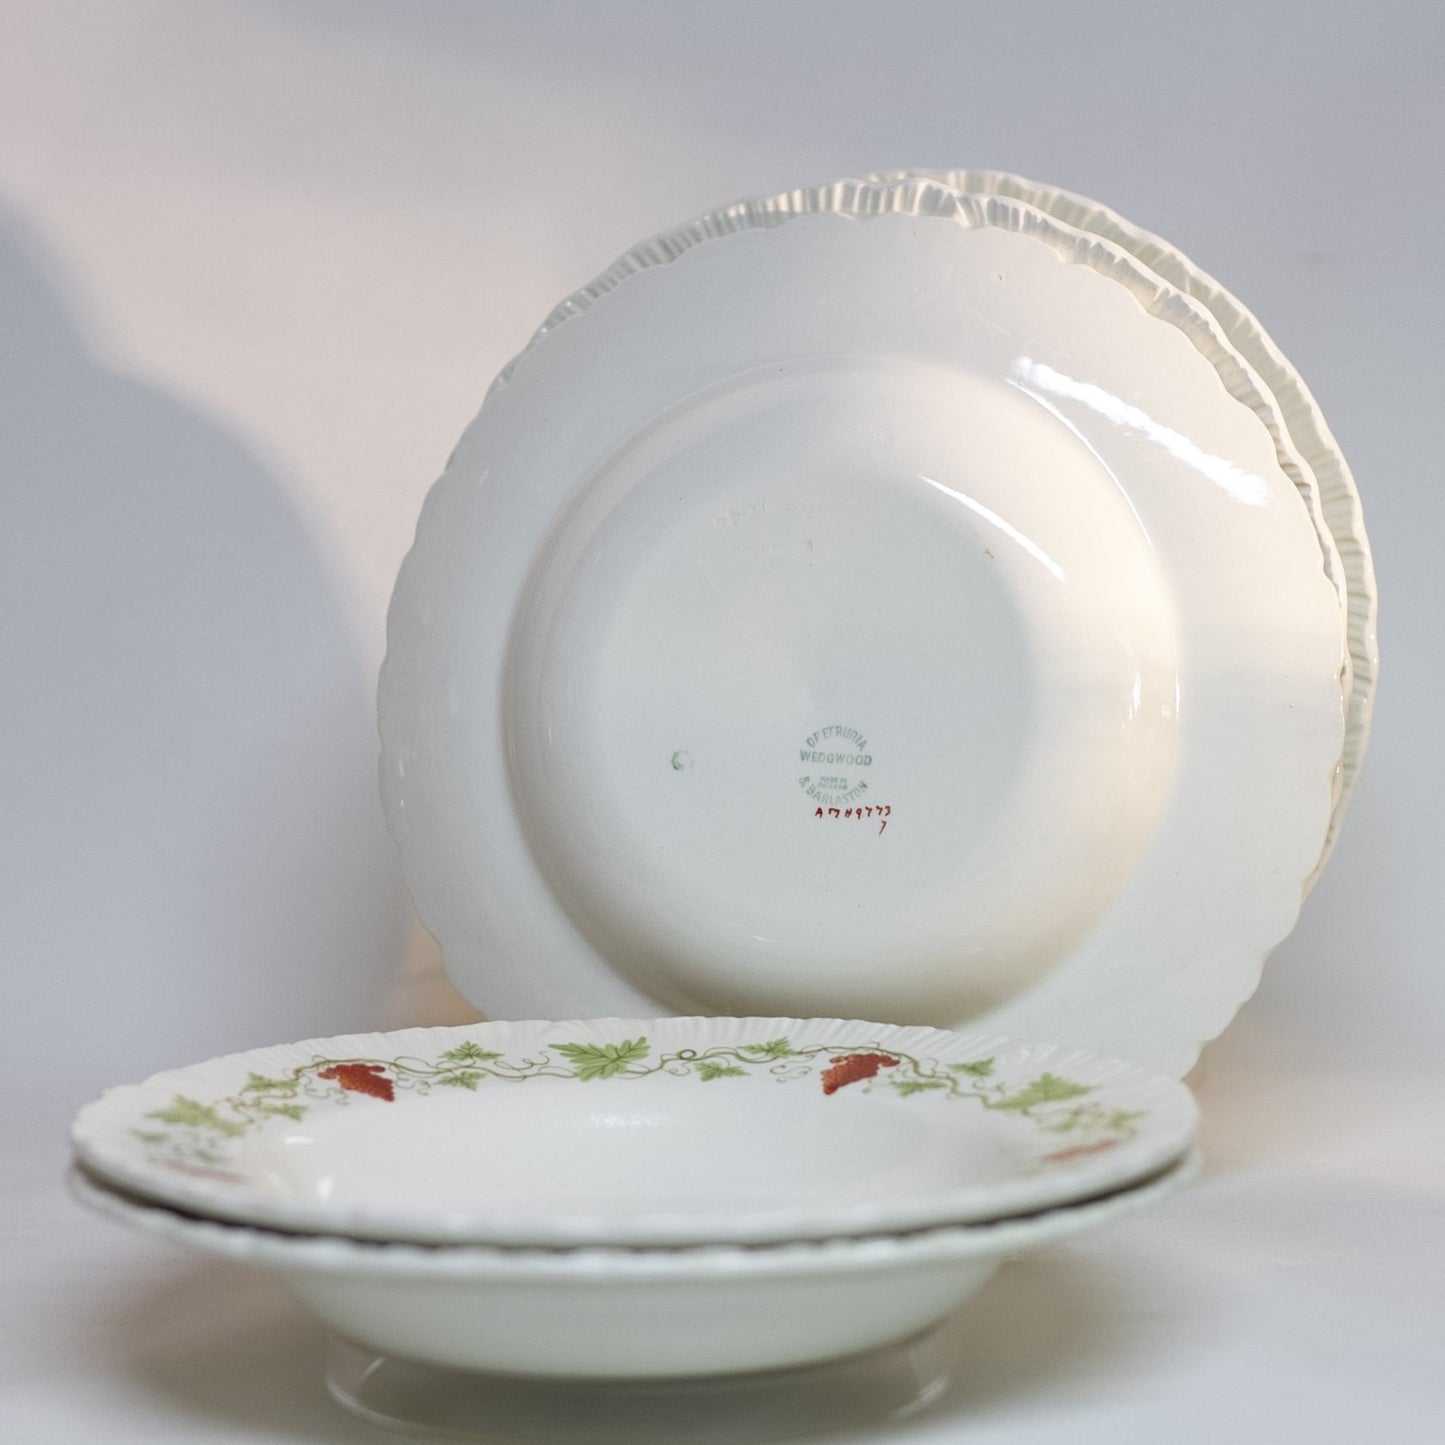 BACCHUS RED by Wedgewood RIMMED SOUP BOWL Circa 1940 - 1974 Discontinued Pattern Made in England